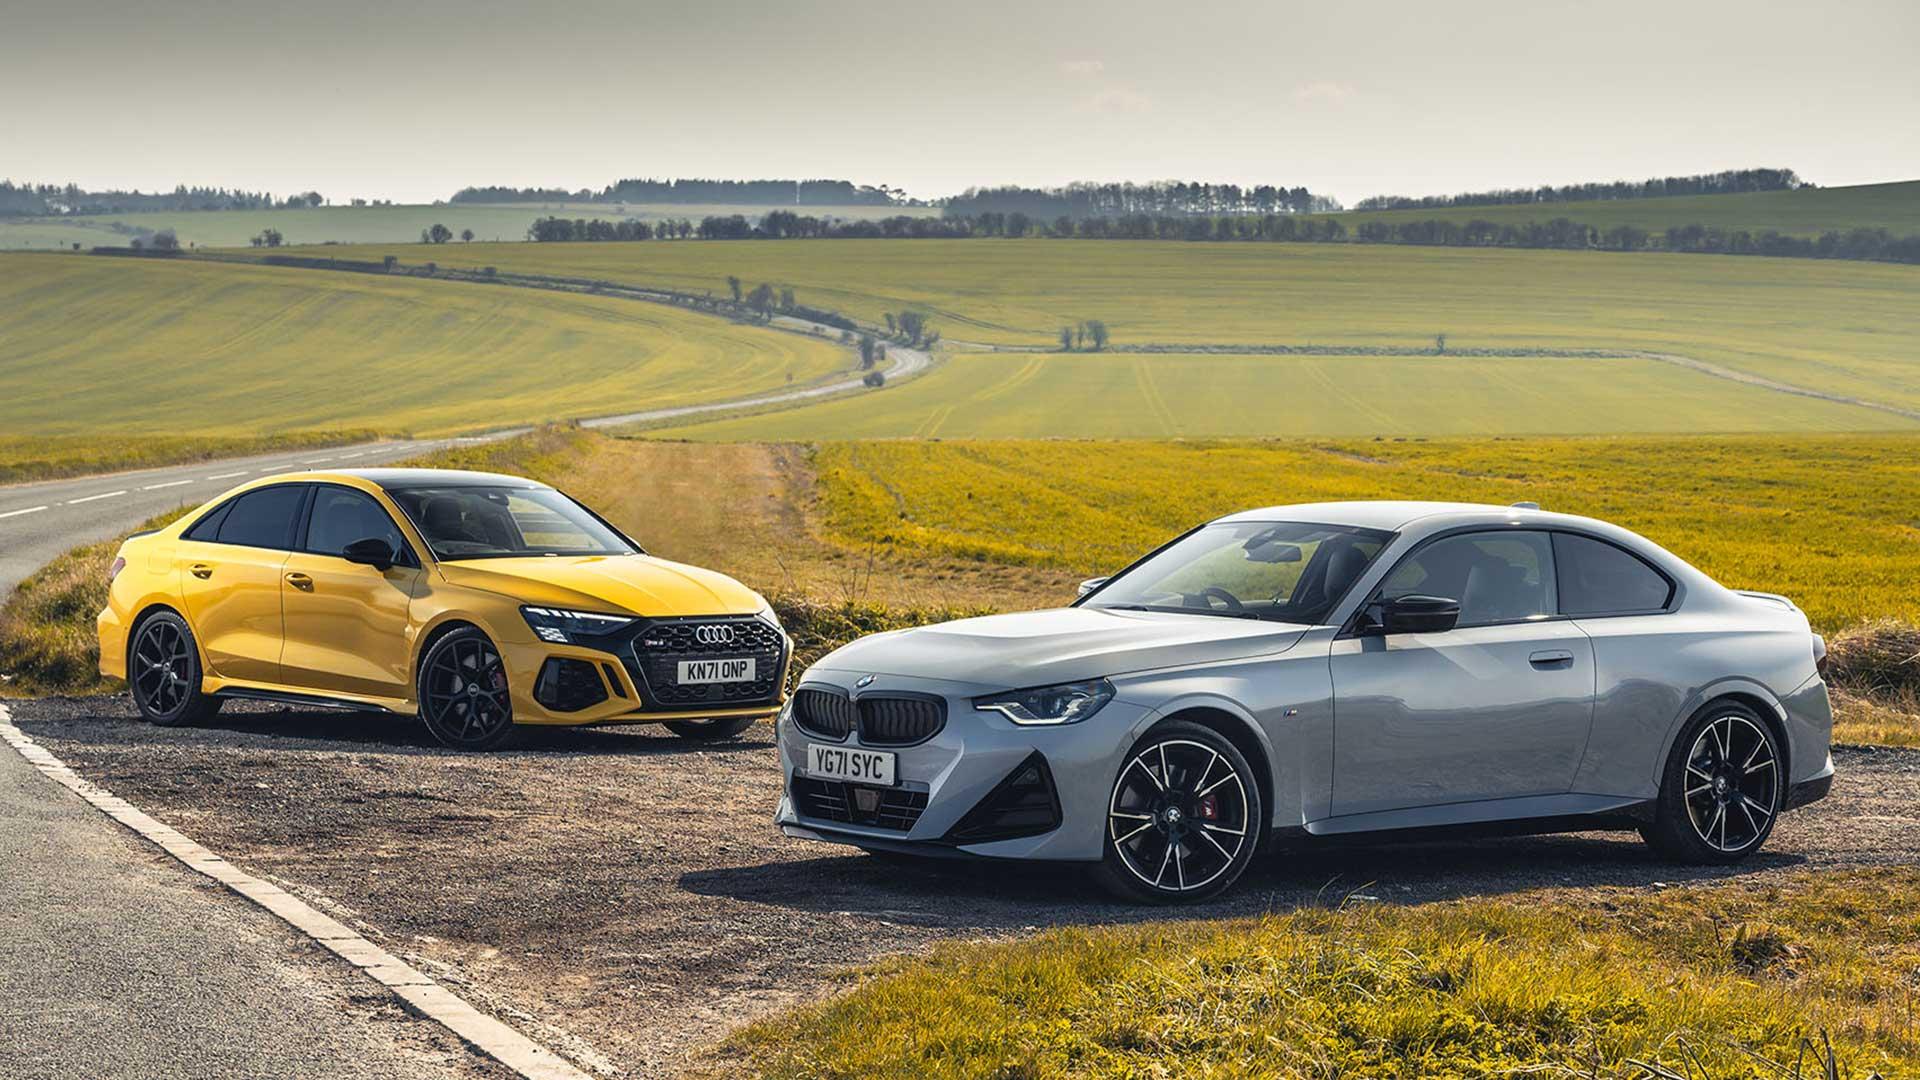 Audi RS 3 Limousine BMW M240i xDrive one behind the other in the field